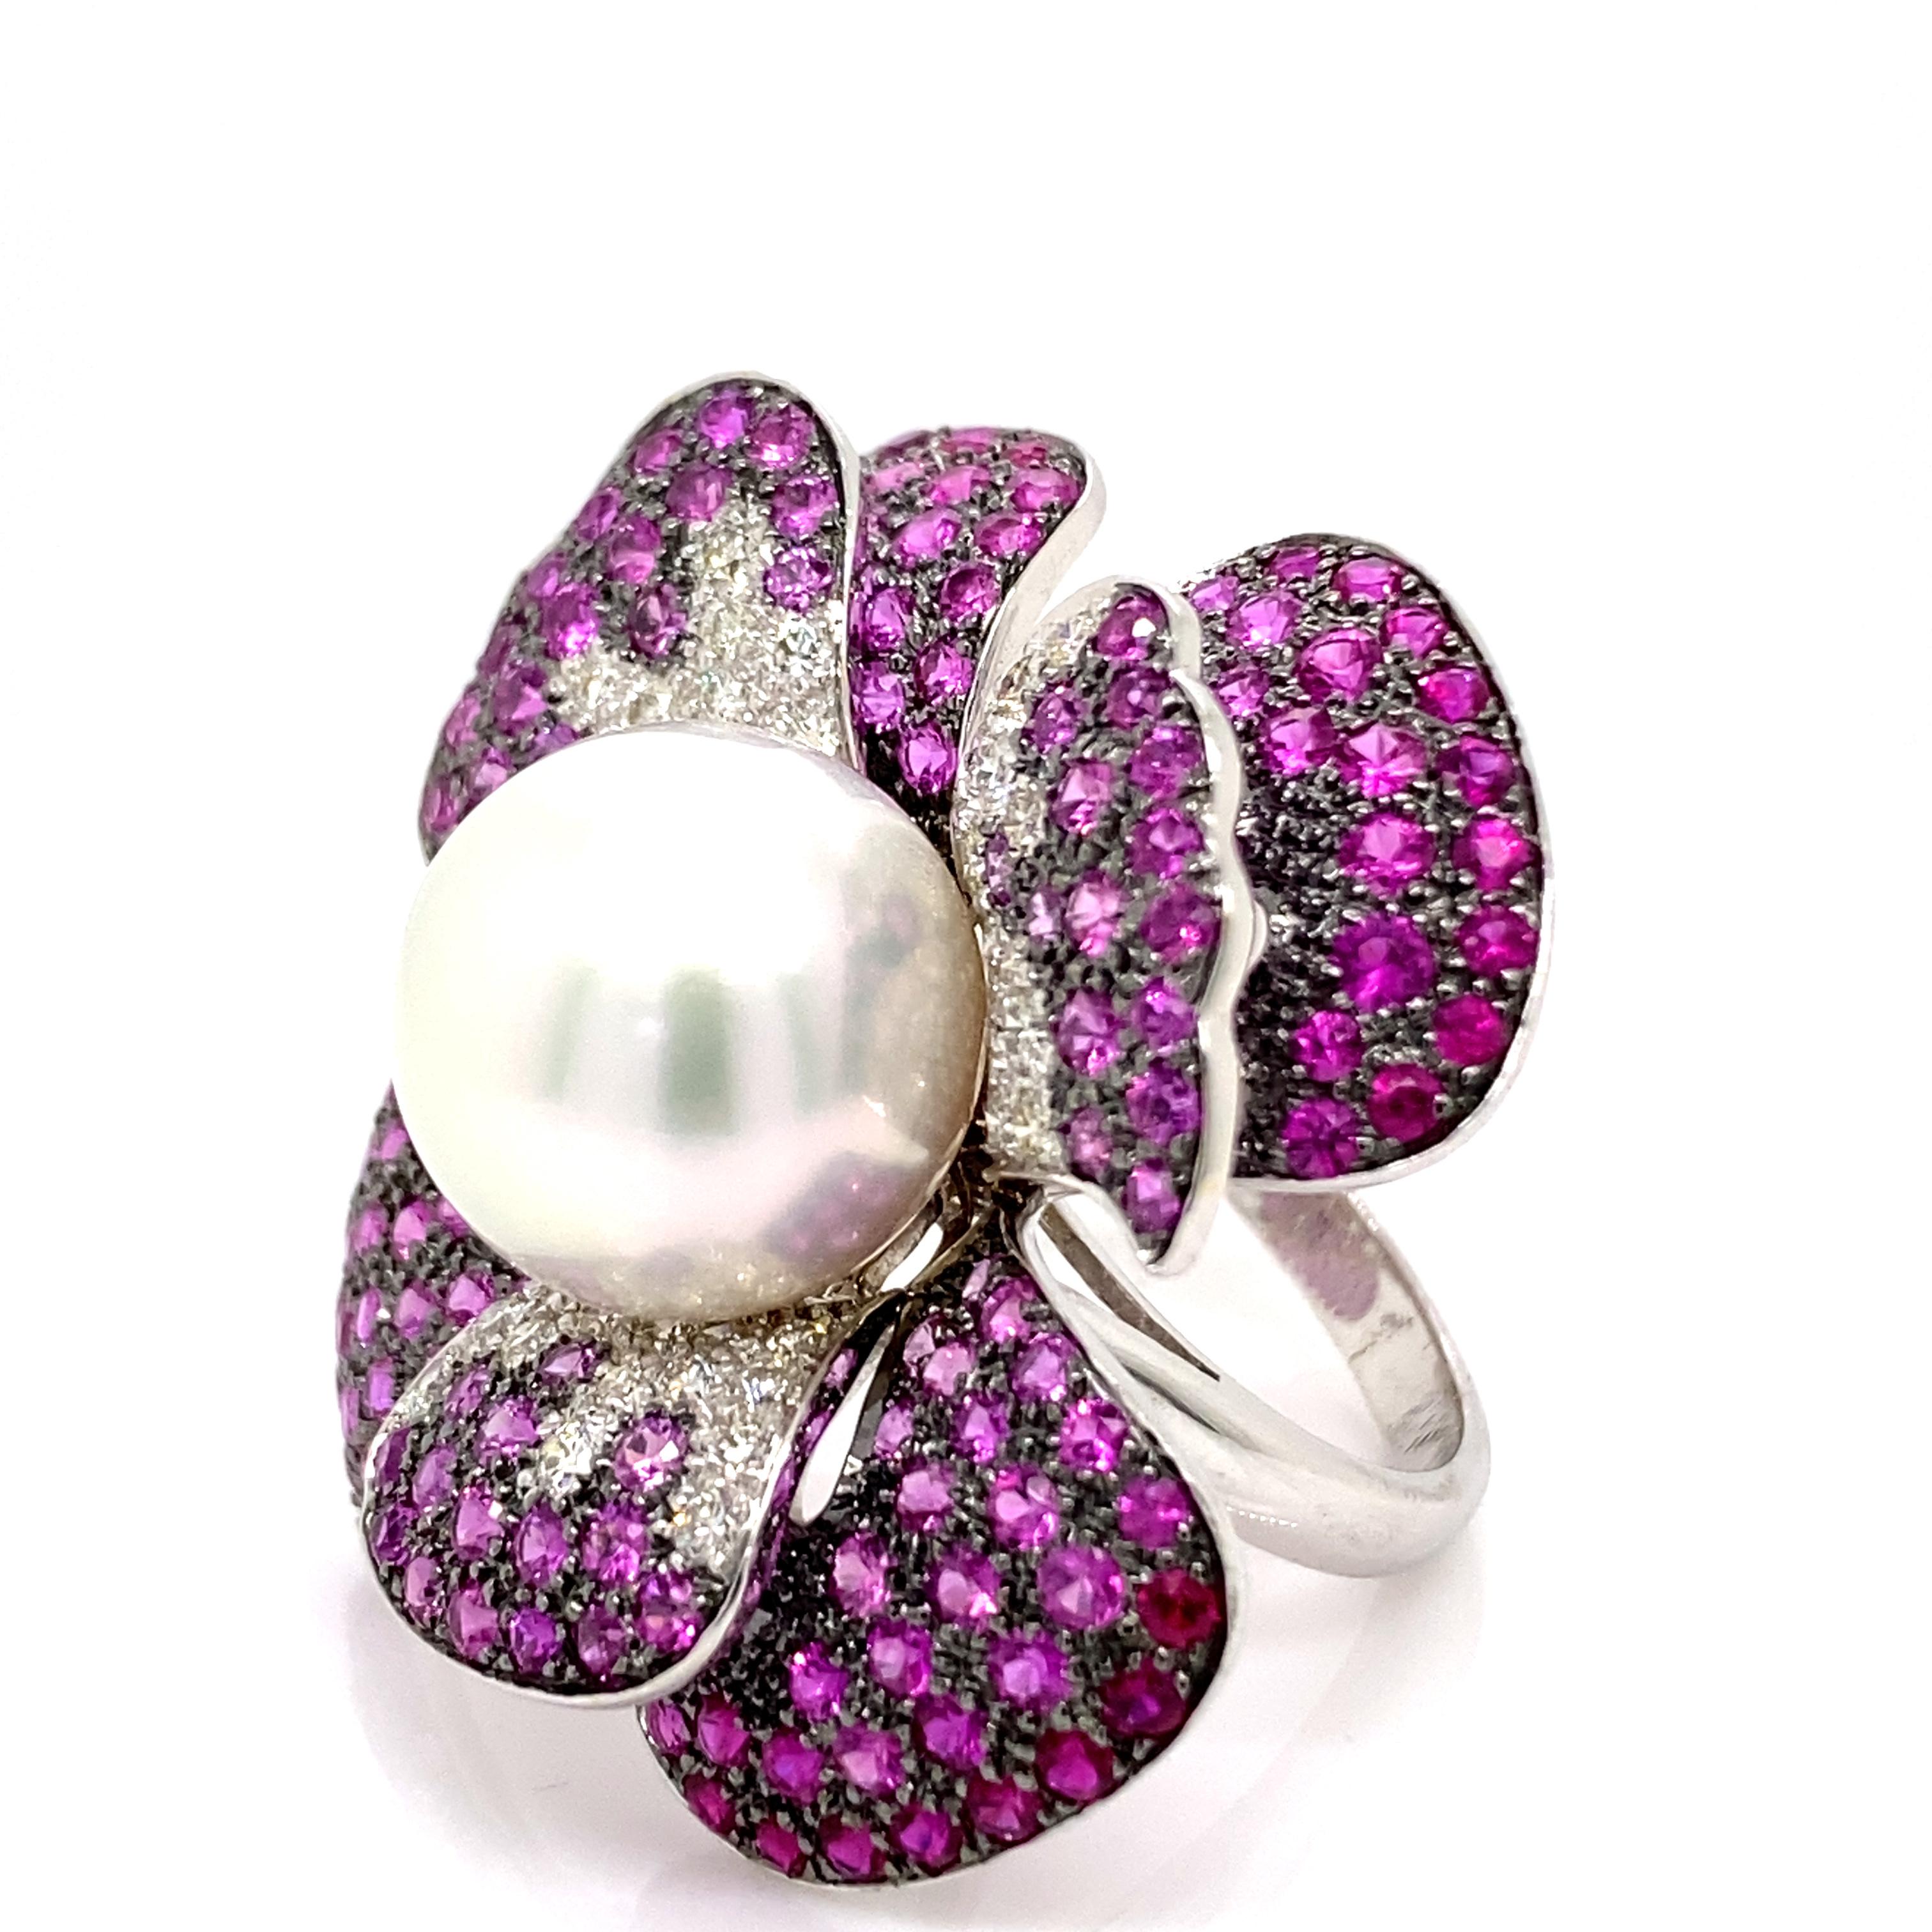 Exquisite and unique multi gemstone floral ring. 
Center South Sea pearl surrounded by 7.15ct of round rubies and 1.10ct of round brilliant diamonds. 8.25ct total gemstone weight set in 18-karat white gold with black rhodium. 
Accommodated with an